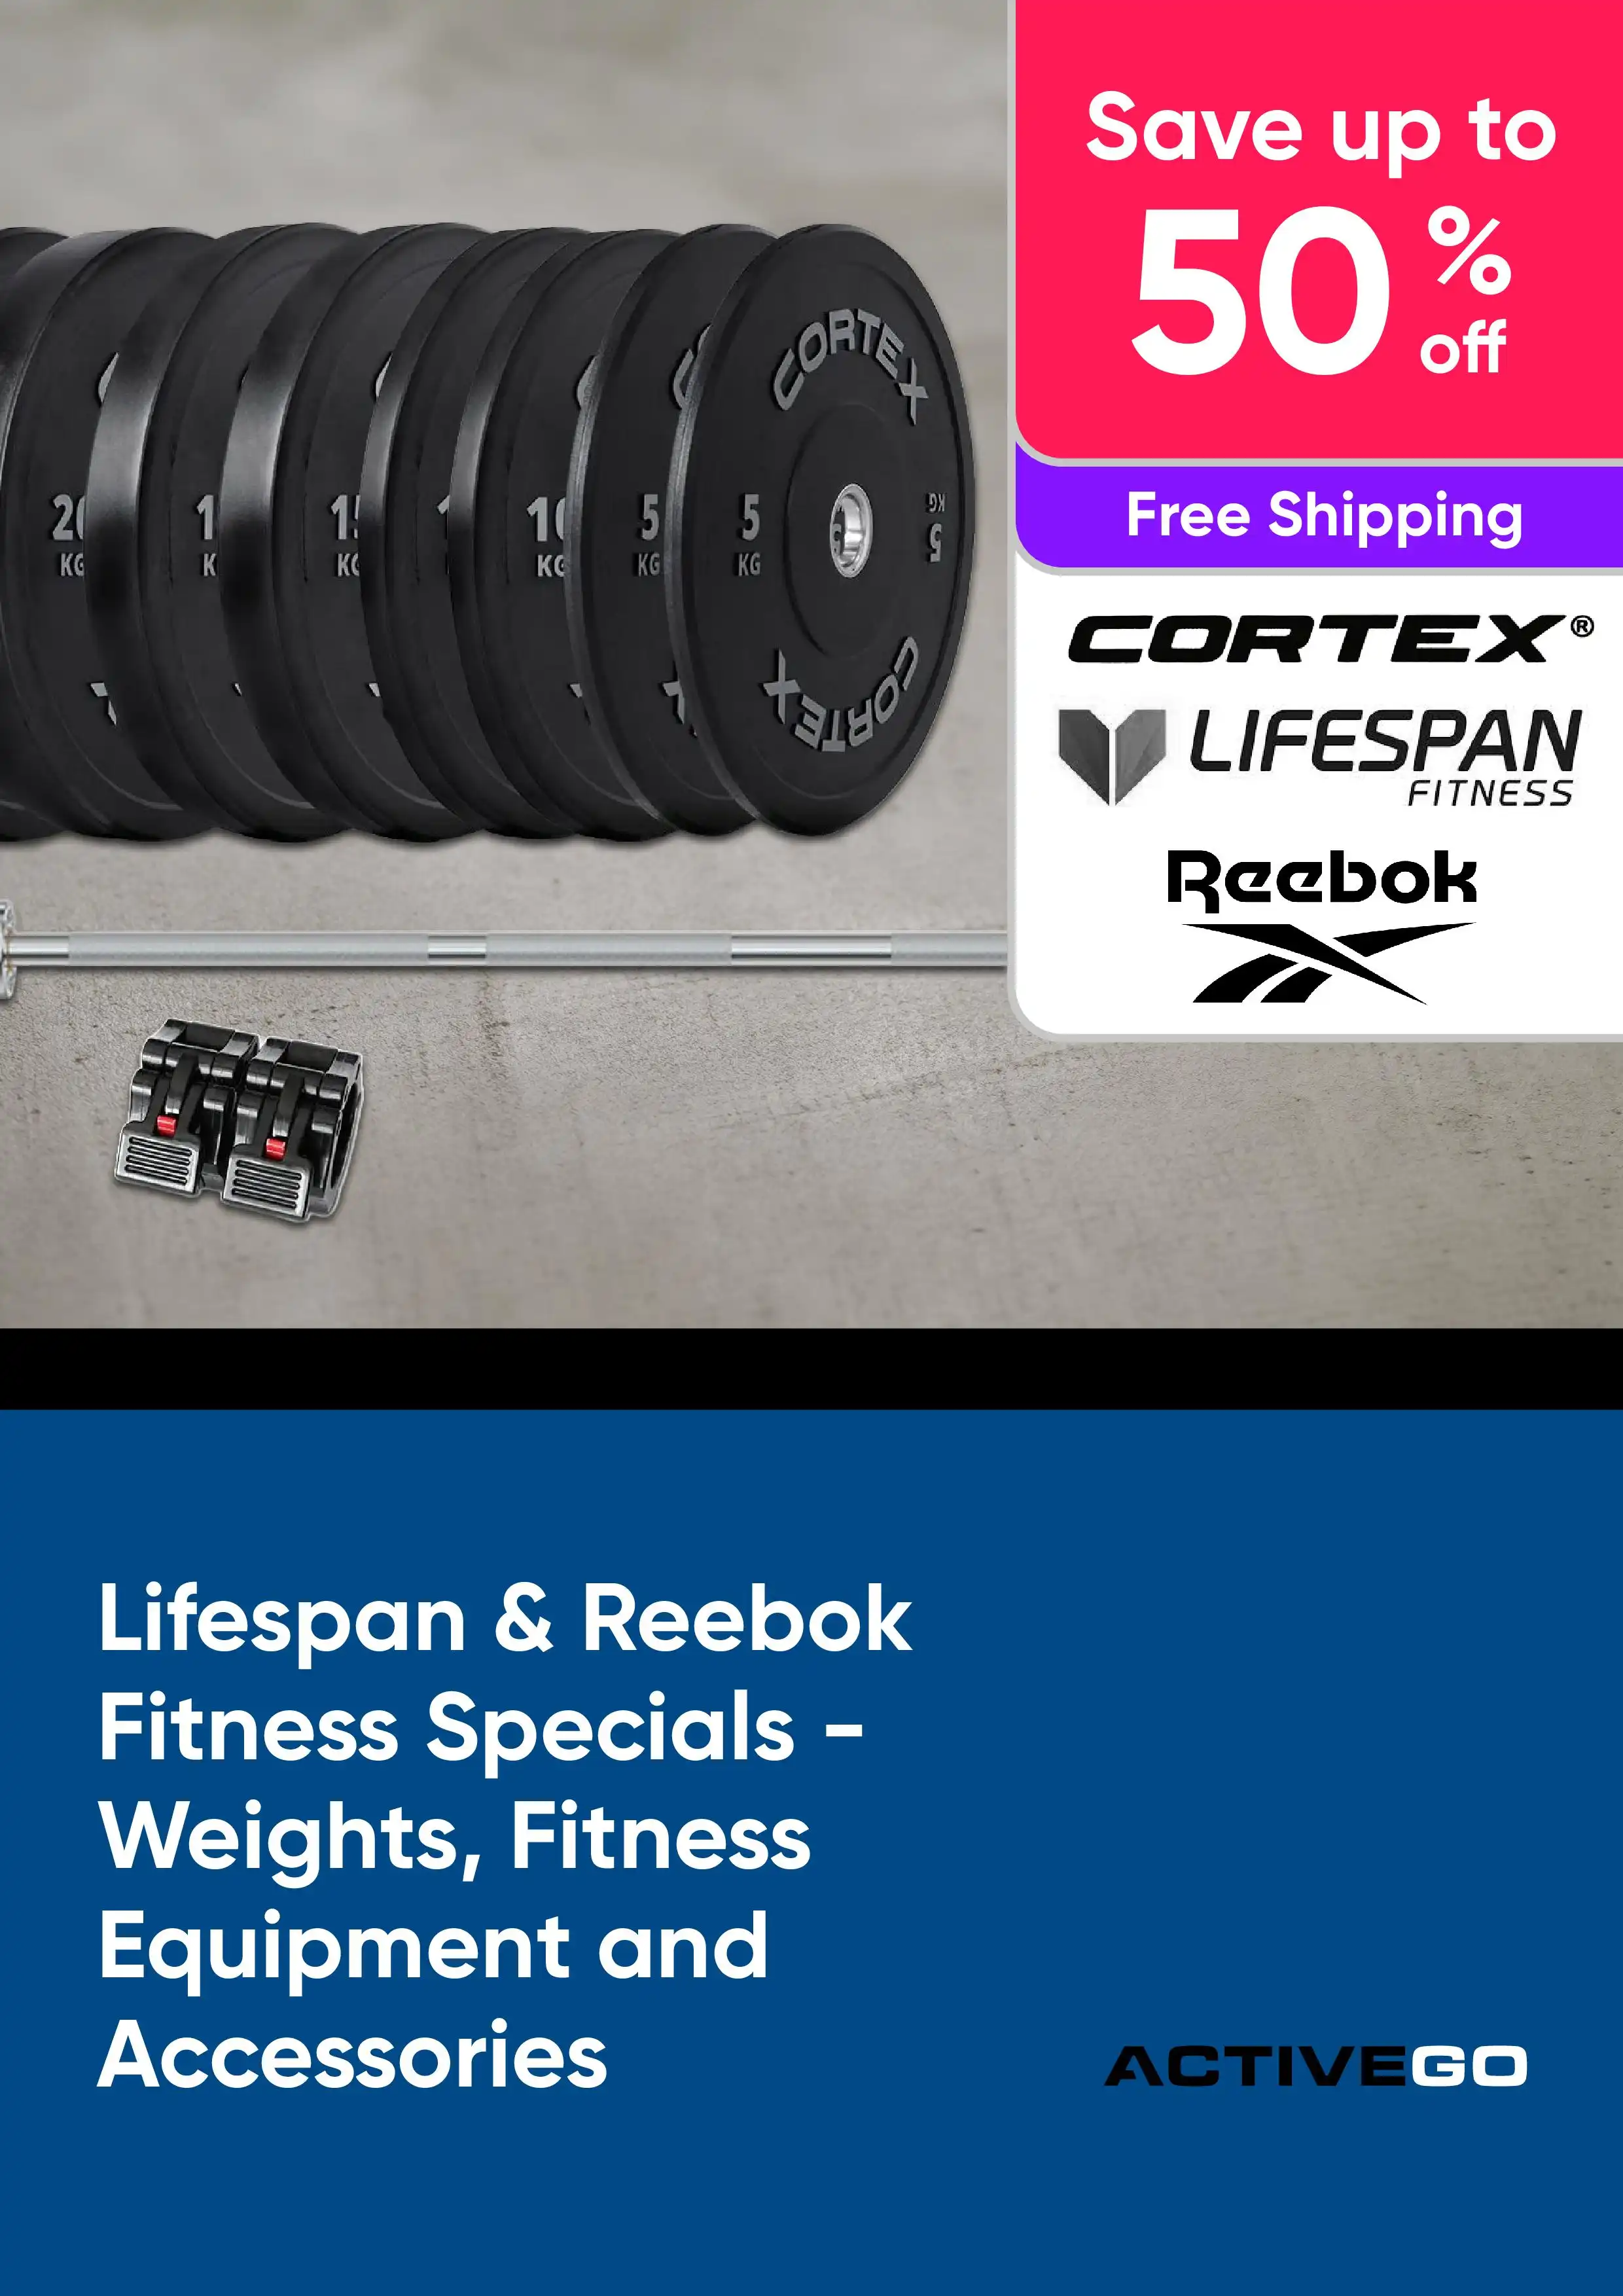 Lifespan & Reebok Fitness Specials - Weights, Fitness Equipment and Accessories - Save up to 50% off